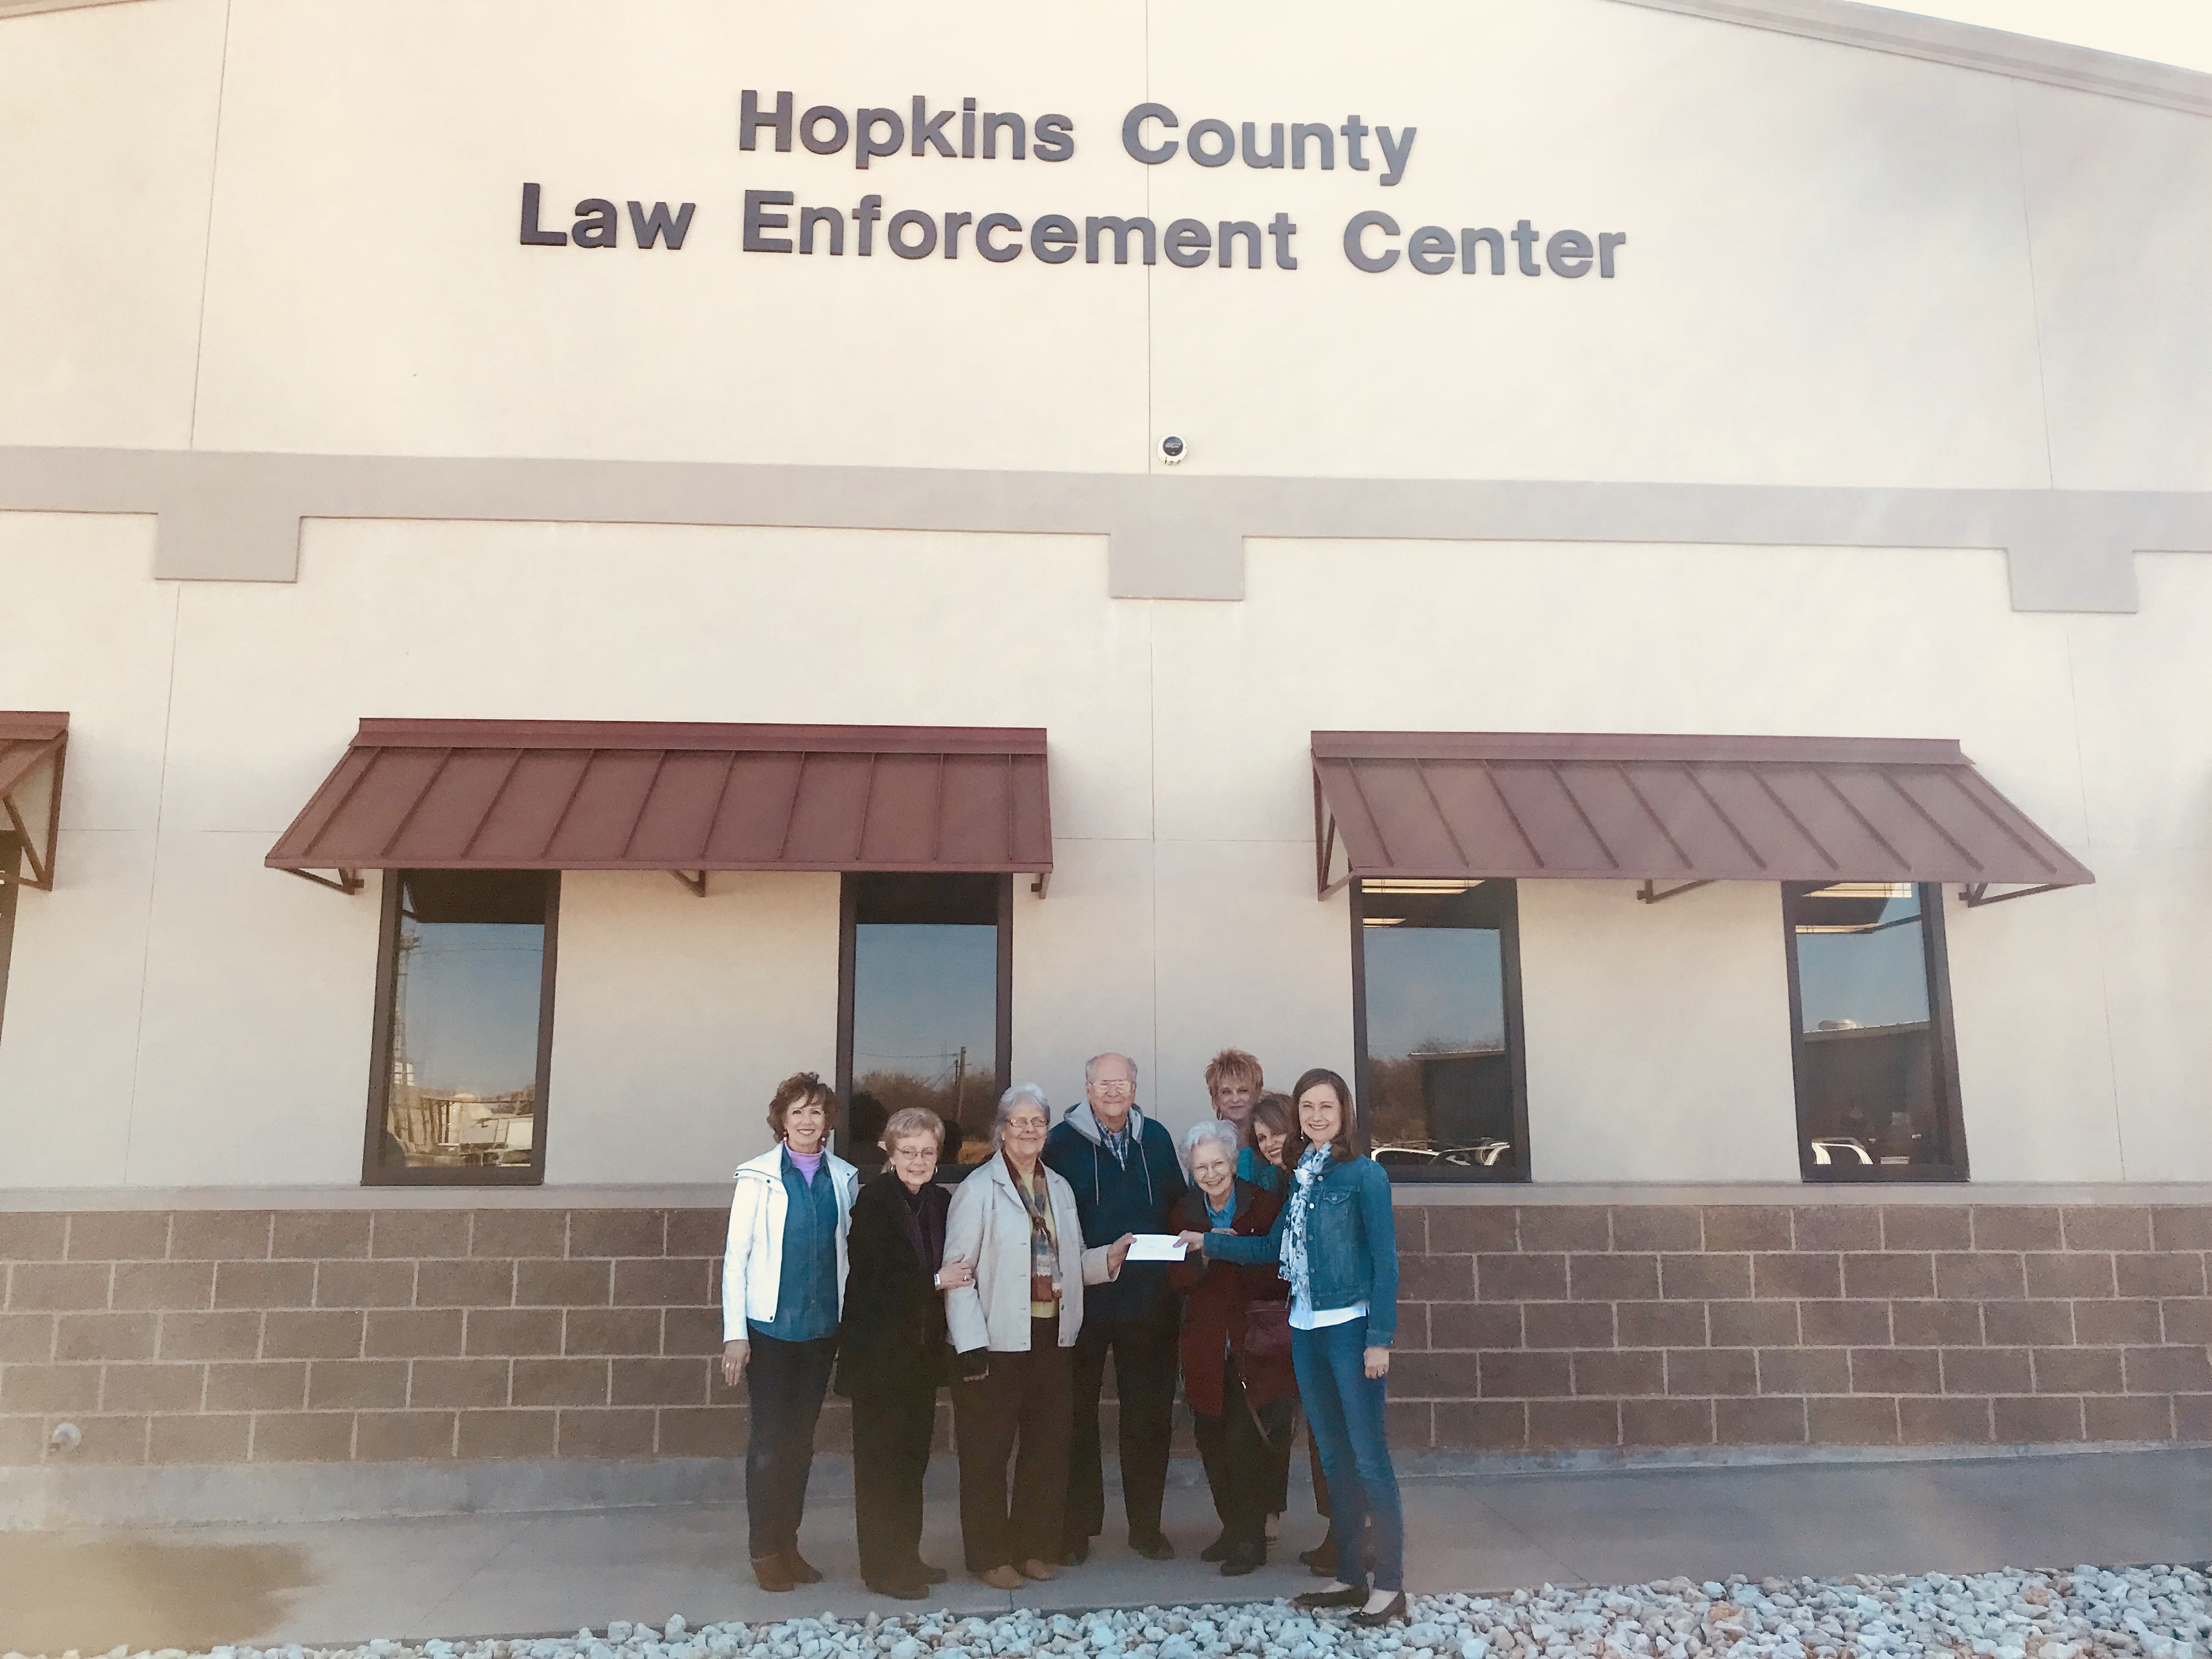 Chick for Charity Make First Donation of 2018 to USA Hope and Restoration Ministries of Hopkins County